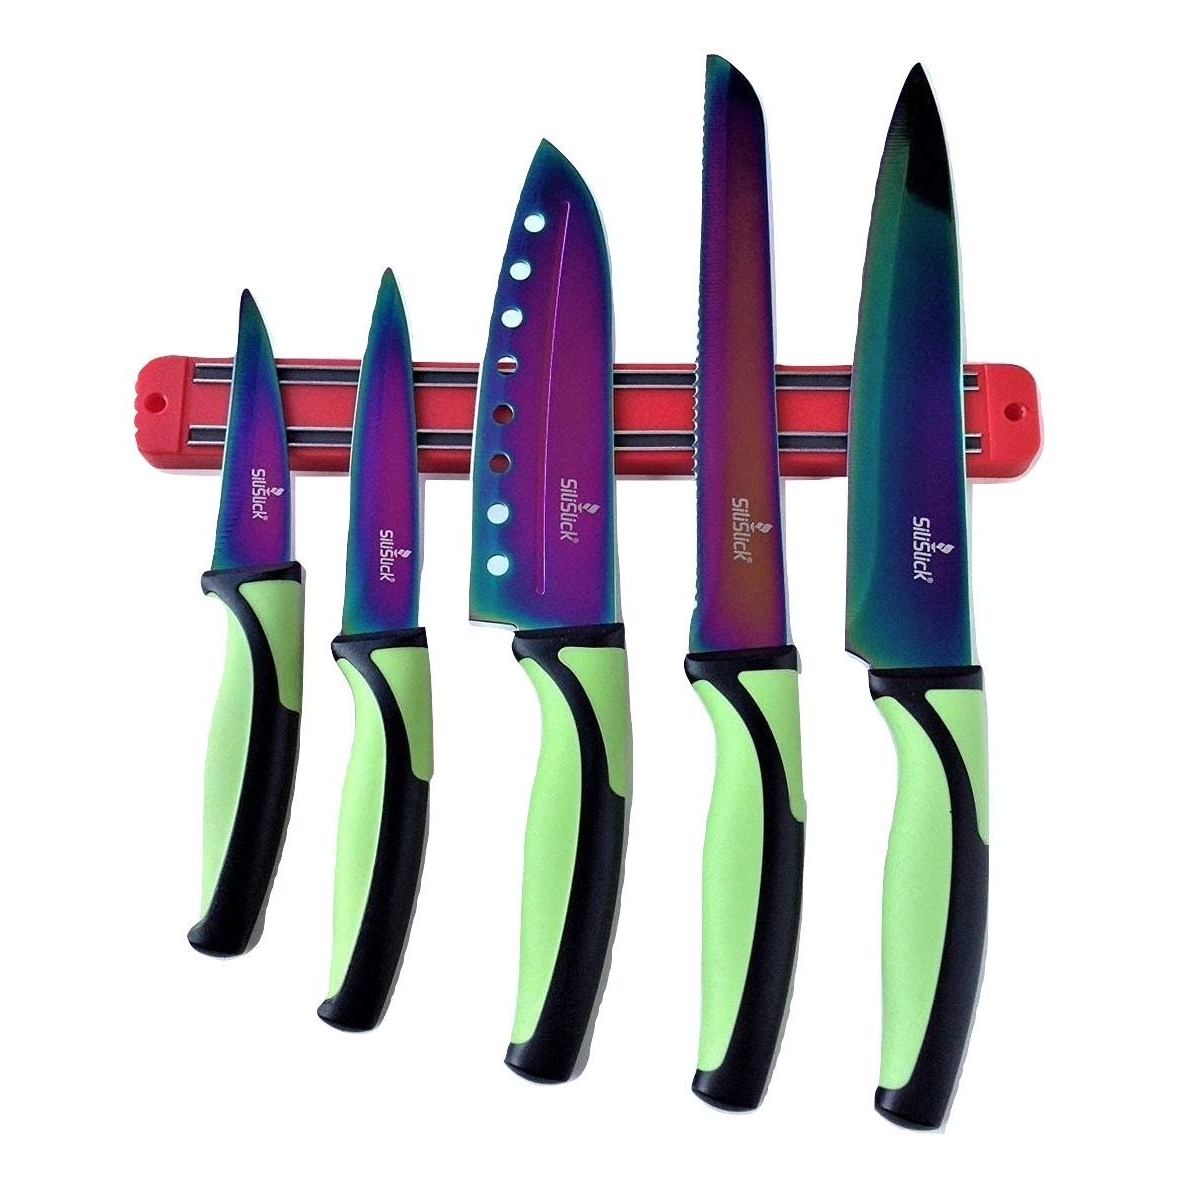 Magnetic Knife/Tool Rack - 2 Red